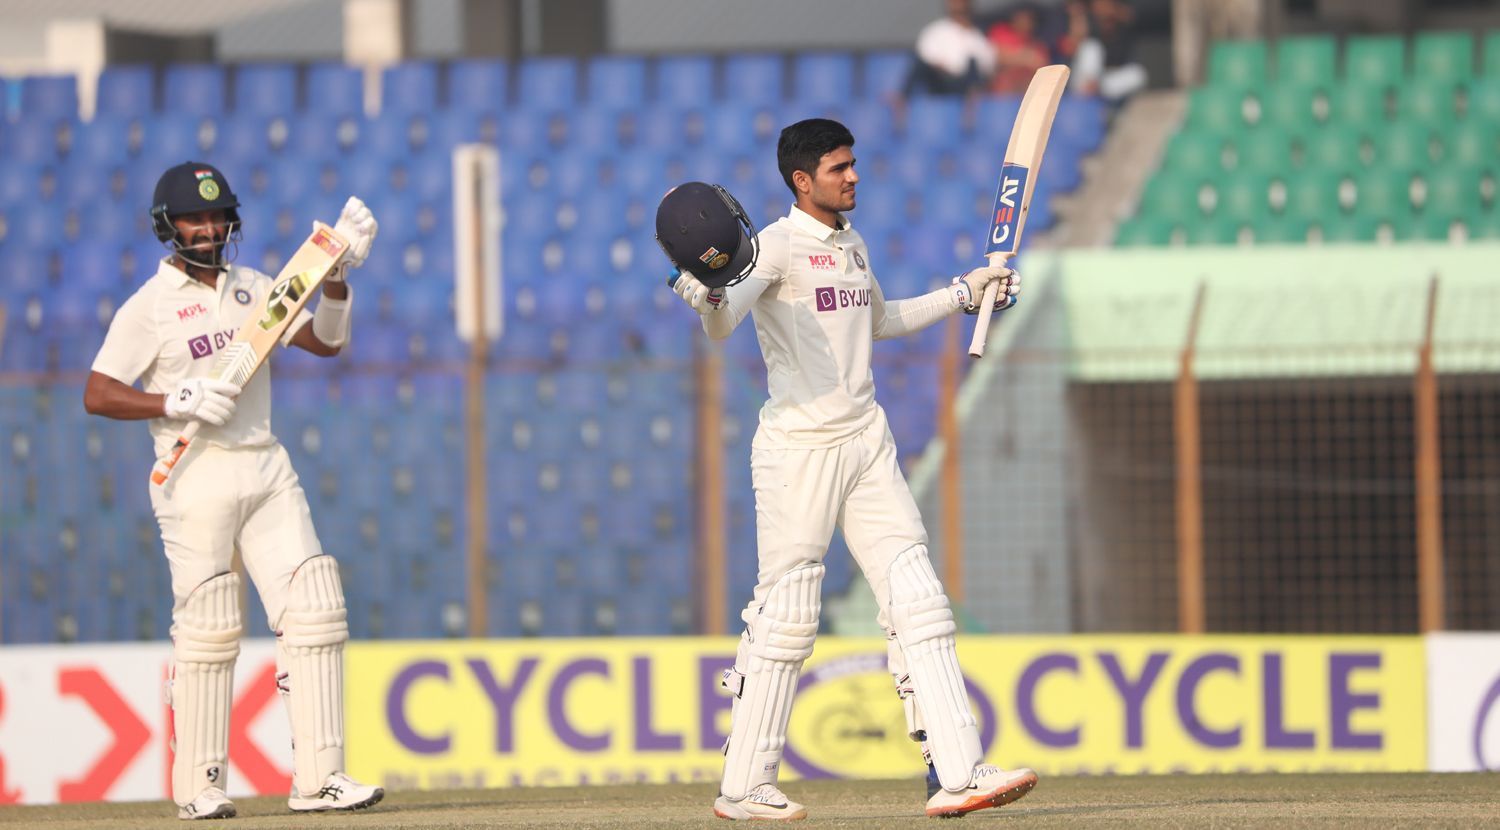 Shubman Gill has never batted below No. 3 in Test cricket. [P/C: BCCI]